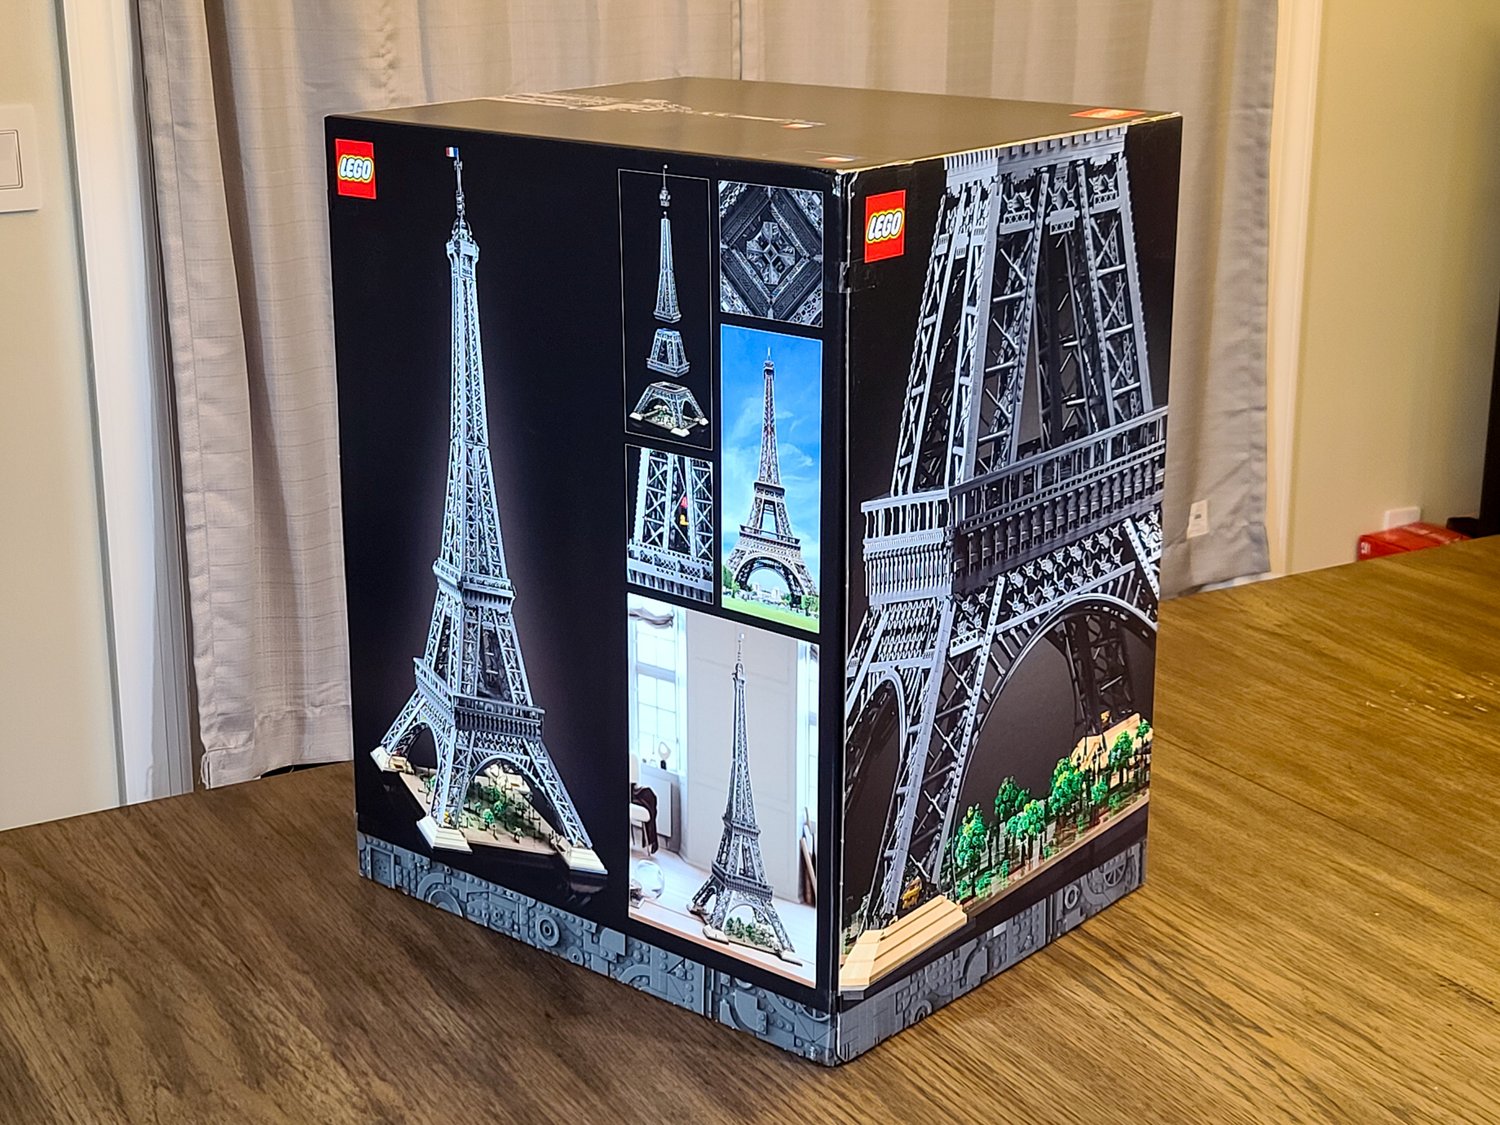 Forget the window display, THIS is the Louis Vuitton / LEGO mashup